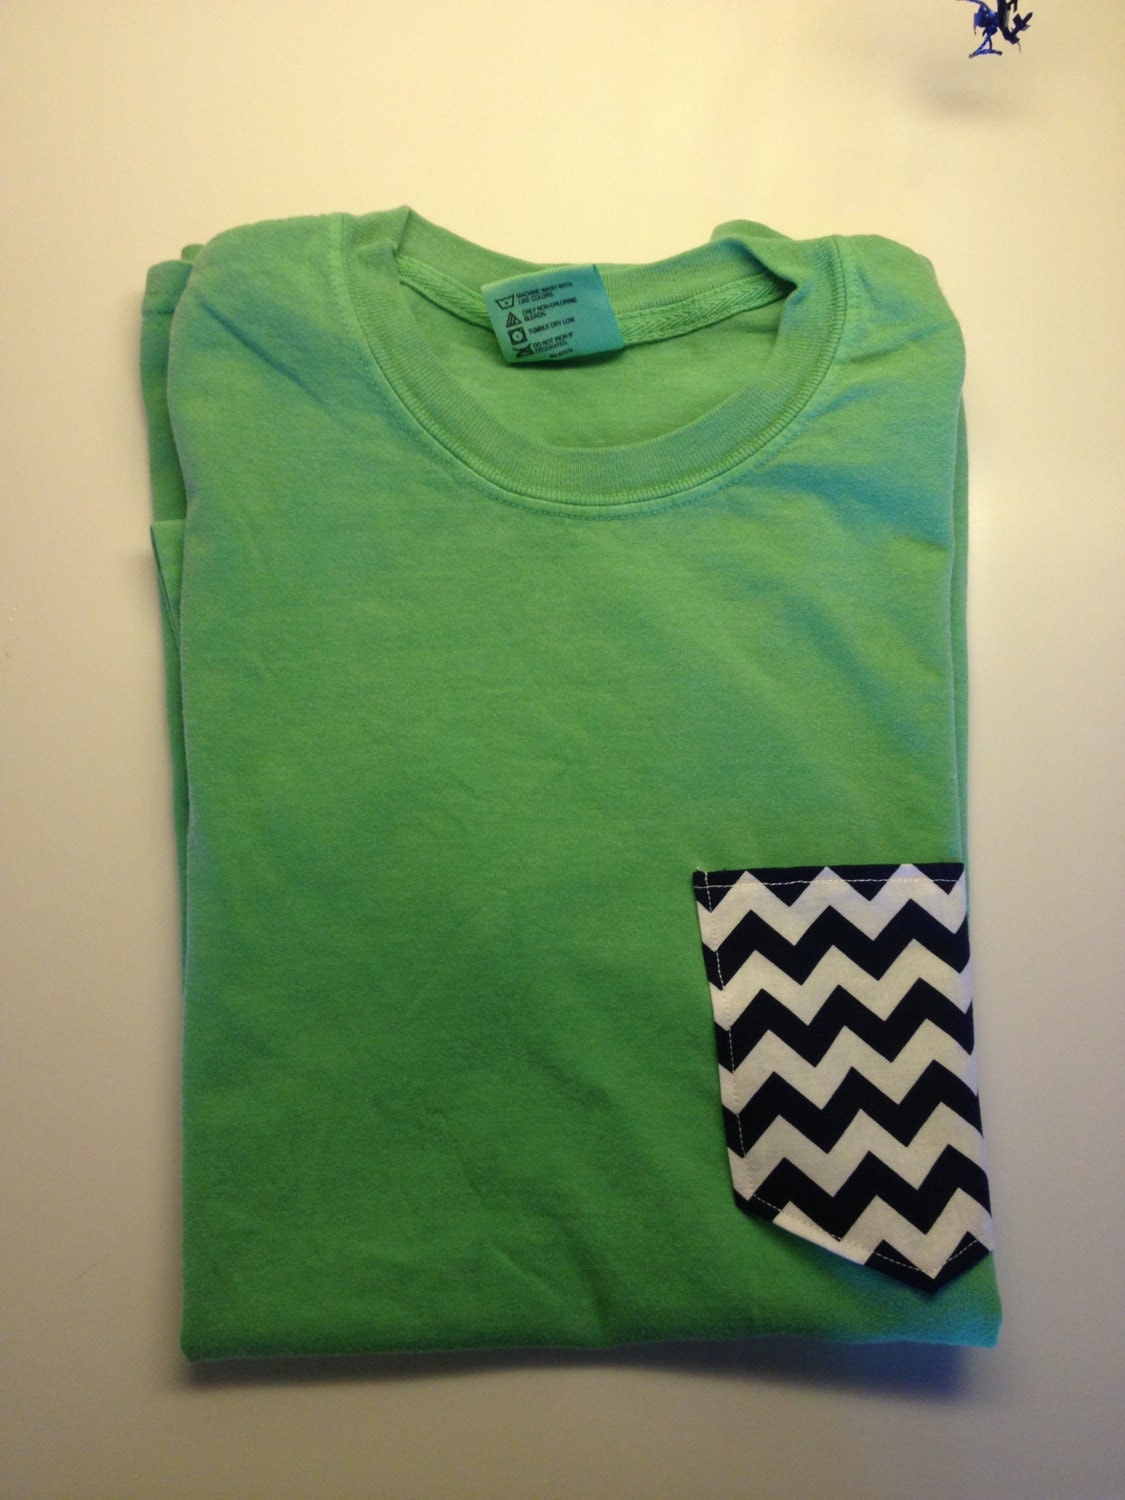 Lime green comfort colors pocket tshirt with navy blue chevron